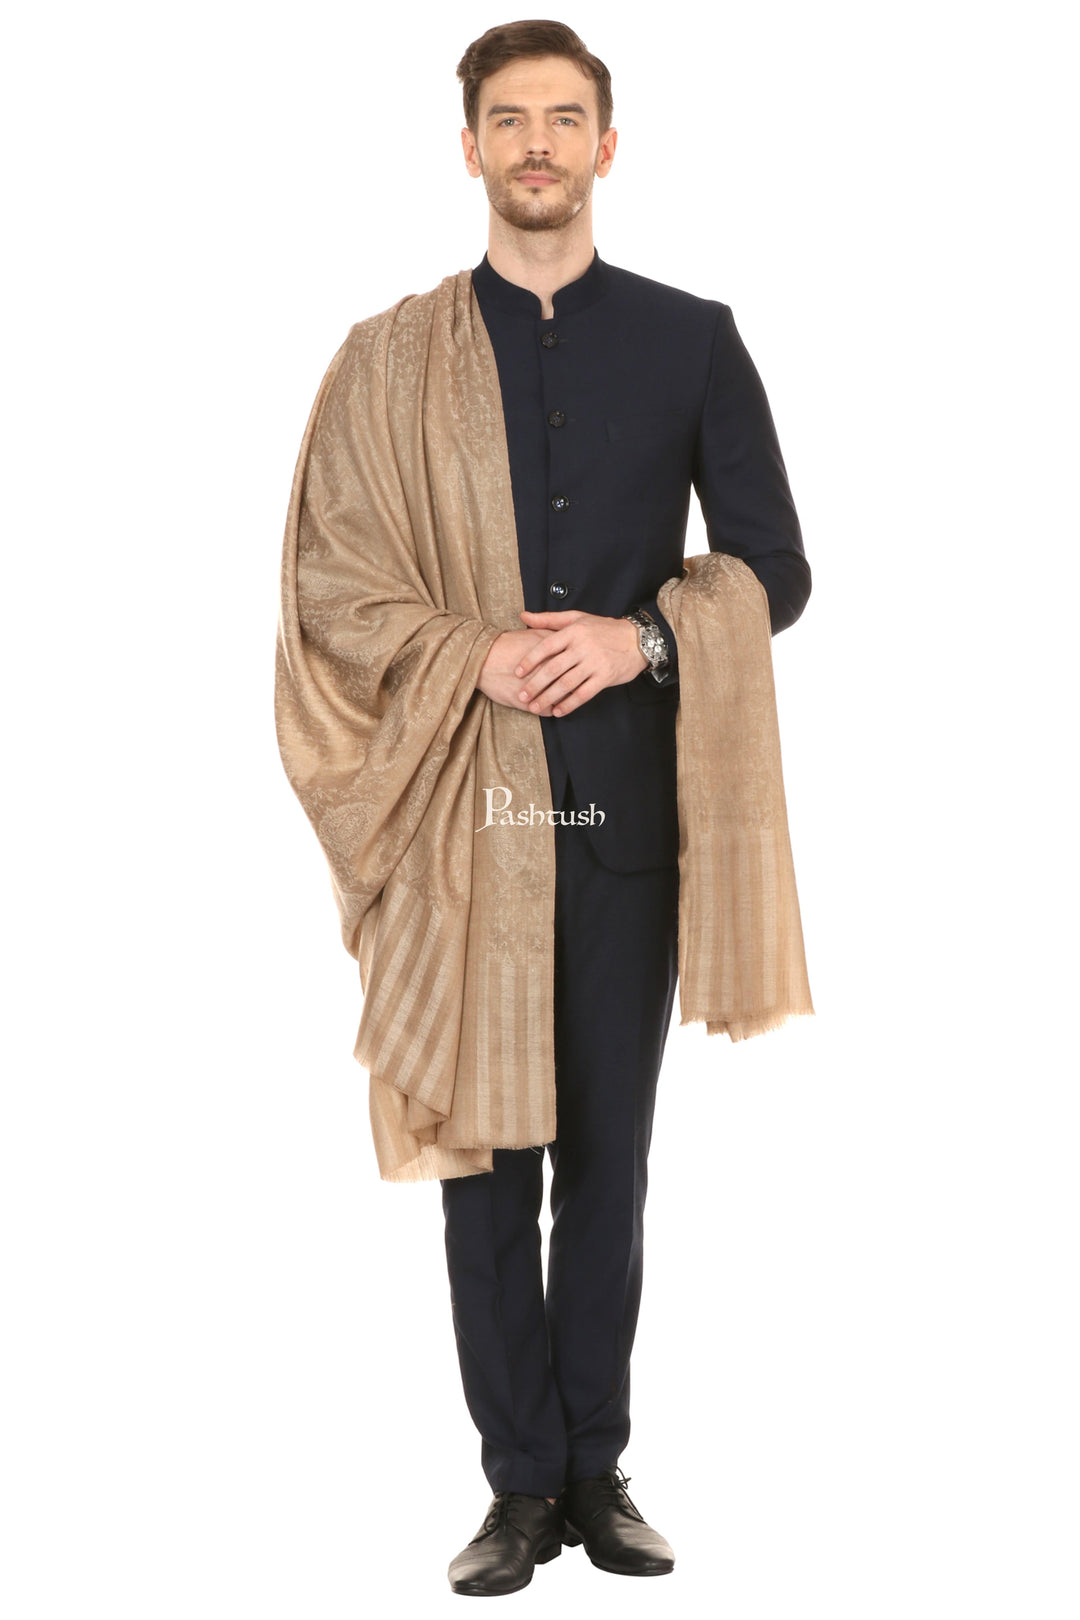 Pashtush India Gift Pack Pashtush His And Her Set Of Fine Wool Shawls With Premium Gift Box Packaging, Beige